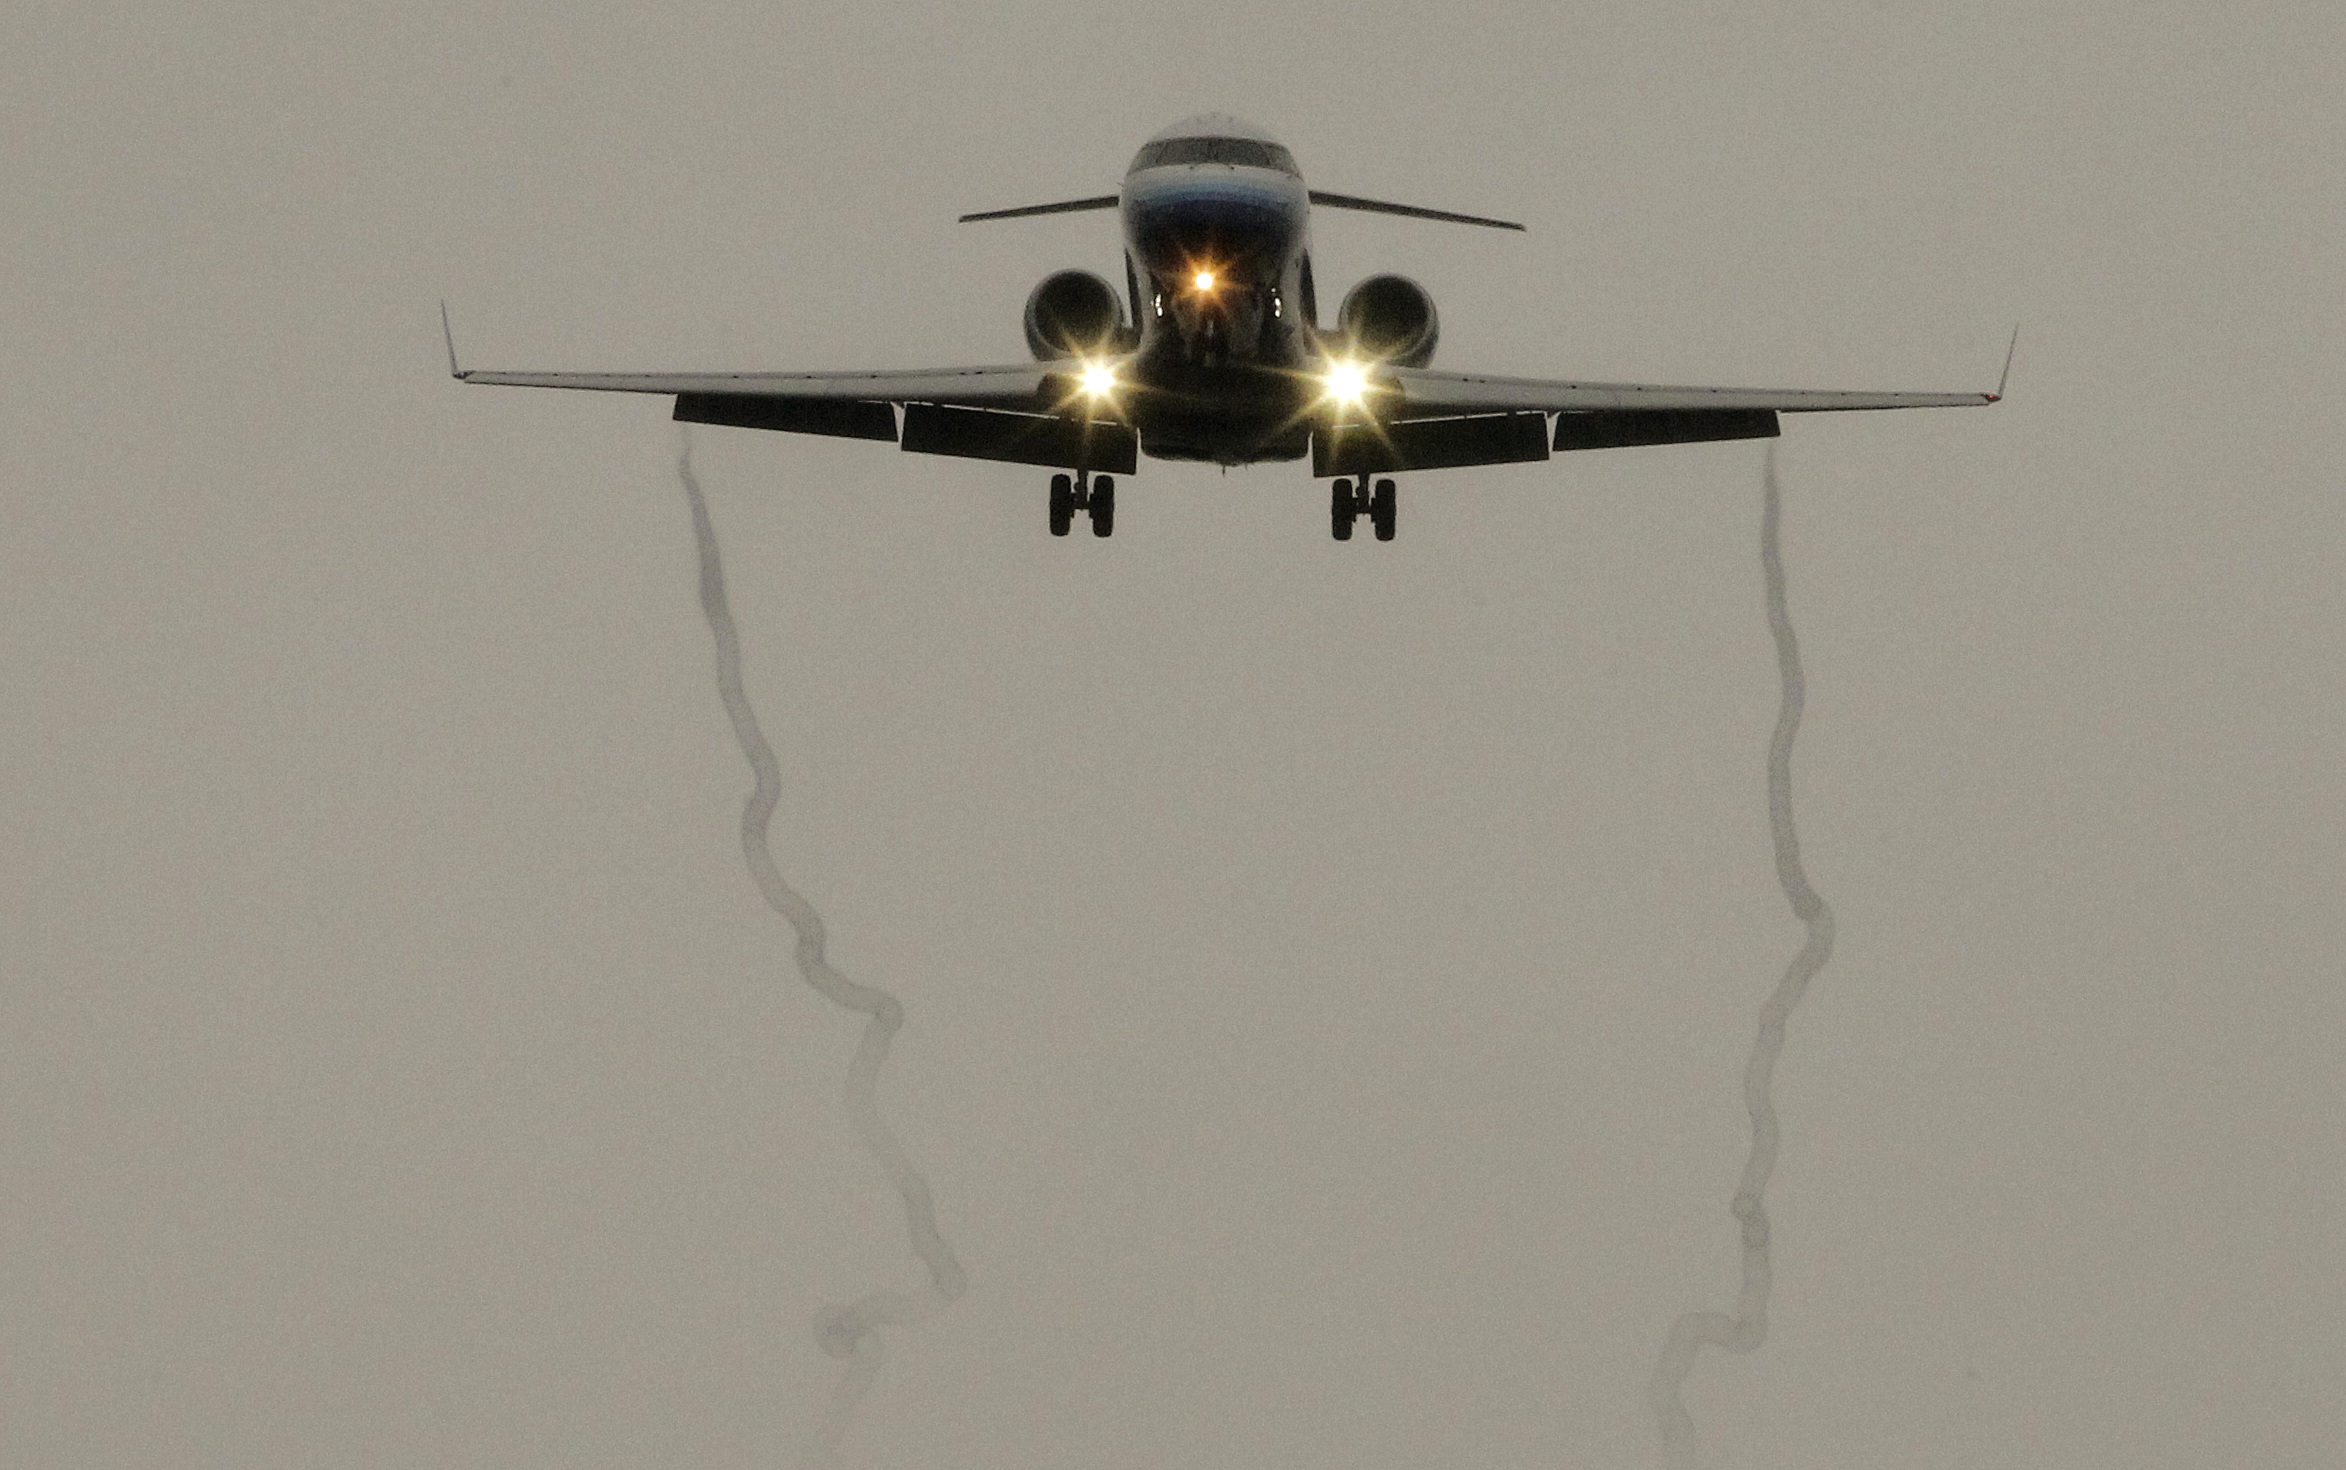 Contrails form on the wings of a passenger jet aircraft as it lands in the rain at Los Angeles International Airport in Los Angeles